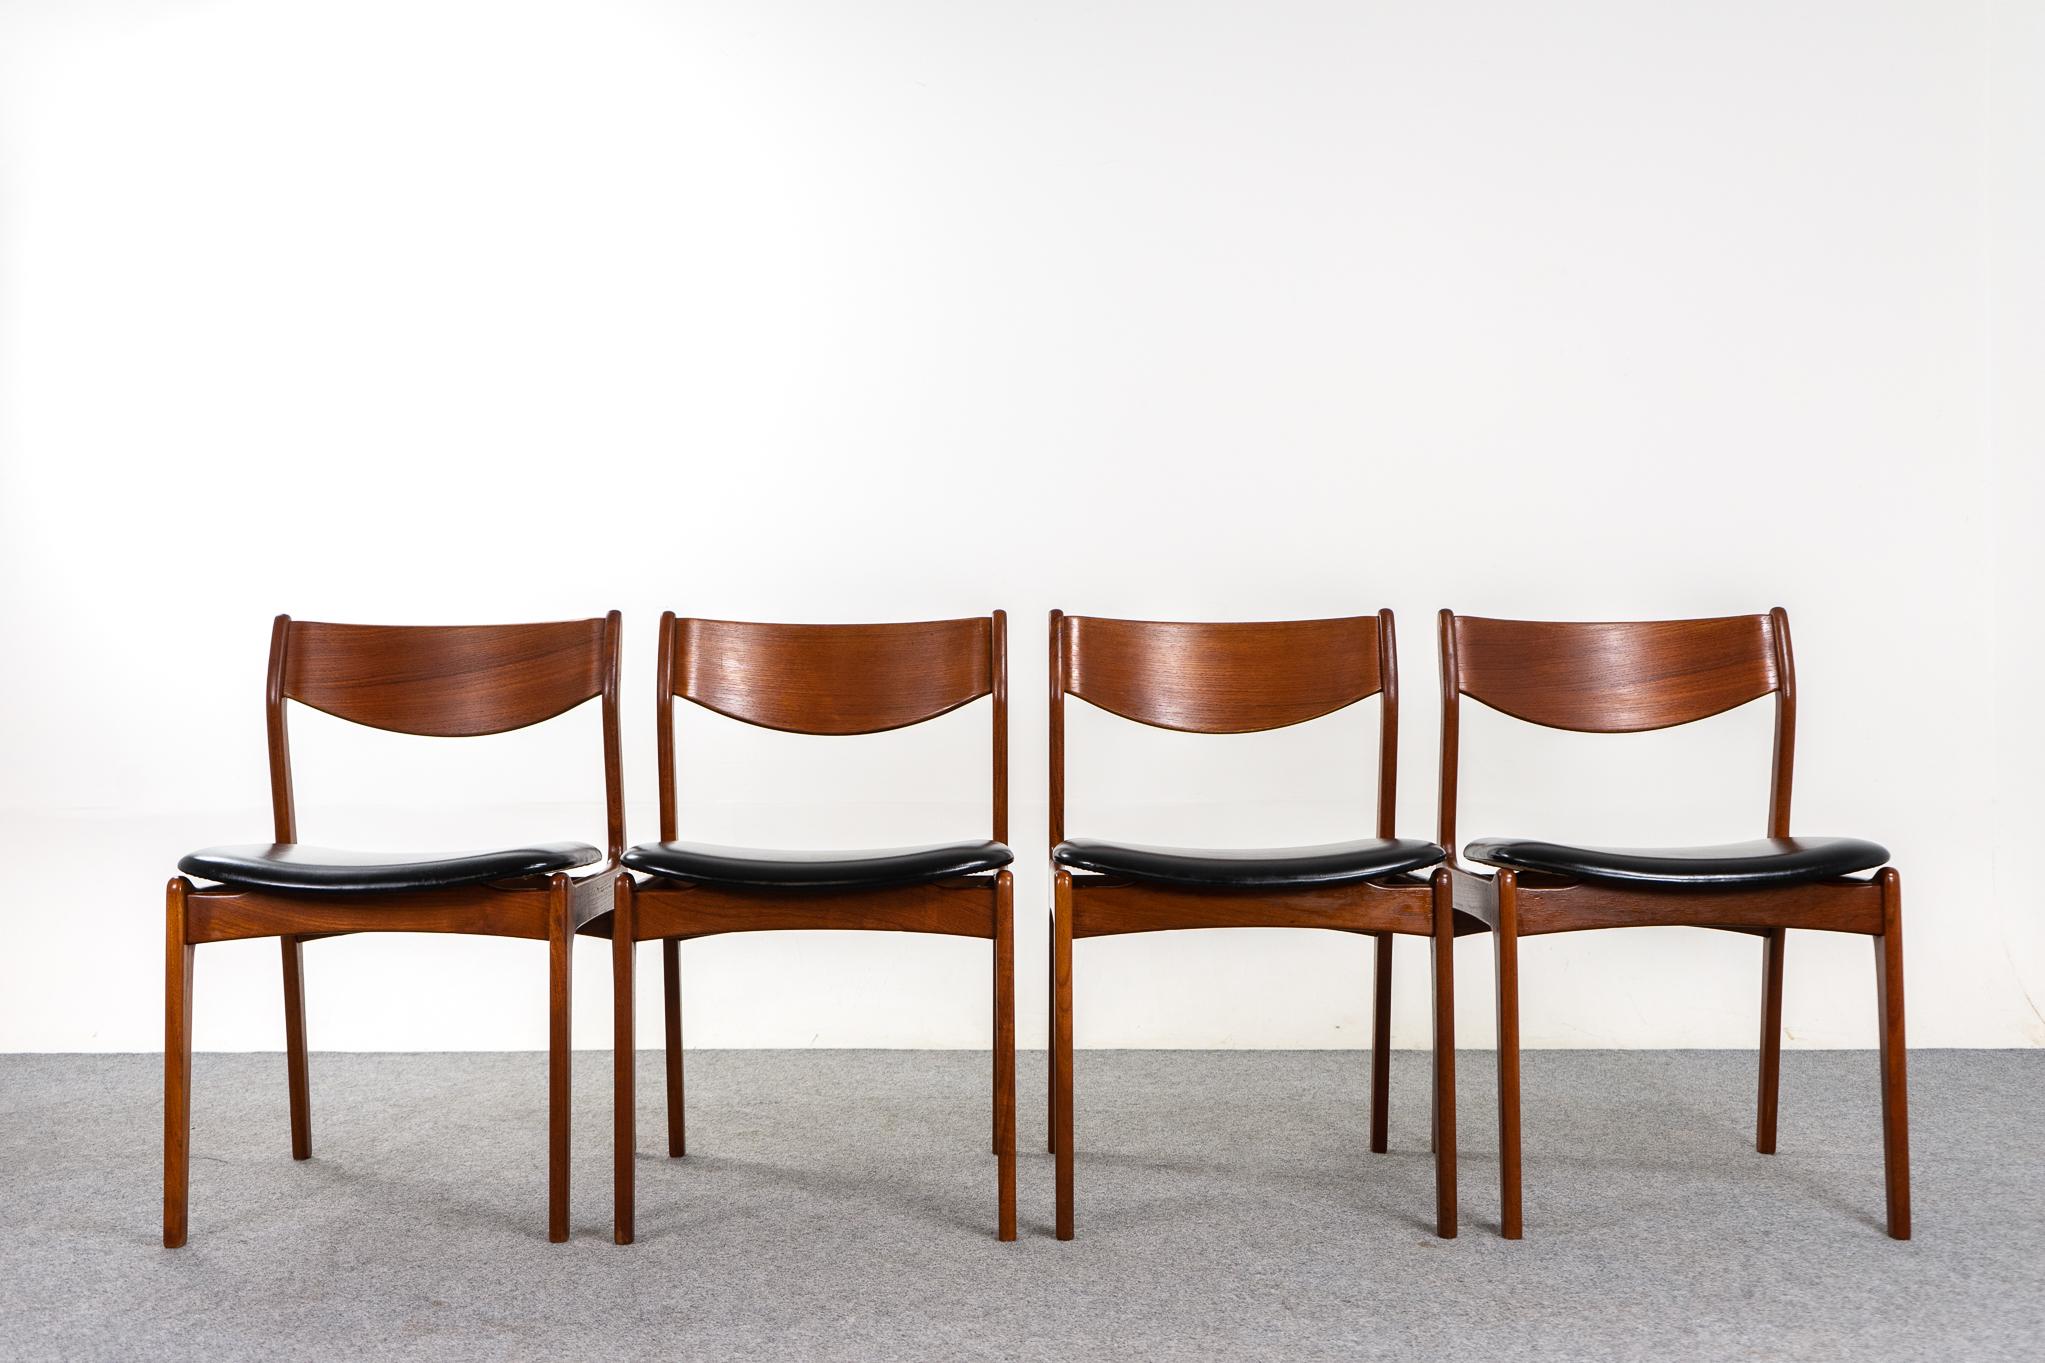 Teak Danish mid-century dining chairs, circa 1960's. Beautifully curved backrests and generous vinyl seat provide support and comfort. Floating seat adds an air of lightness and elegance to the frame, removable seat pad makes reupholstery a